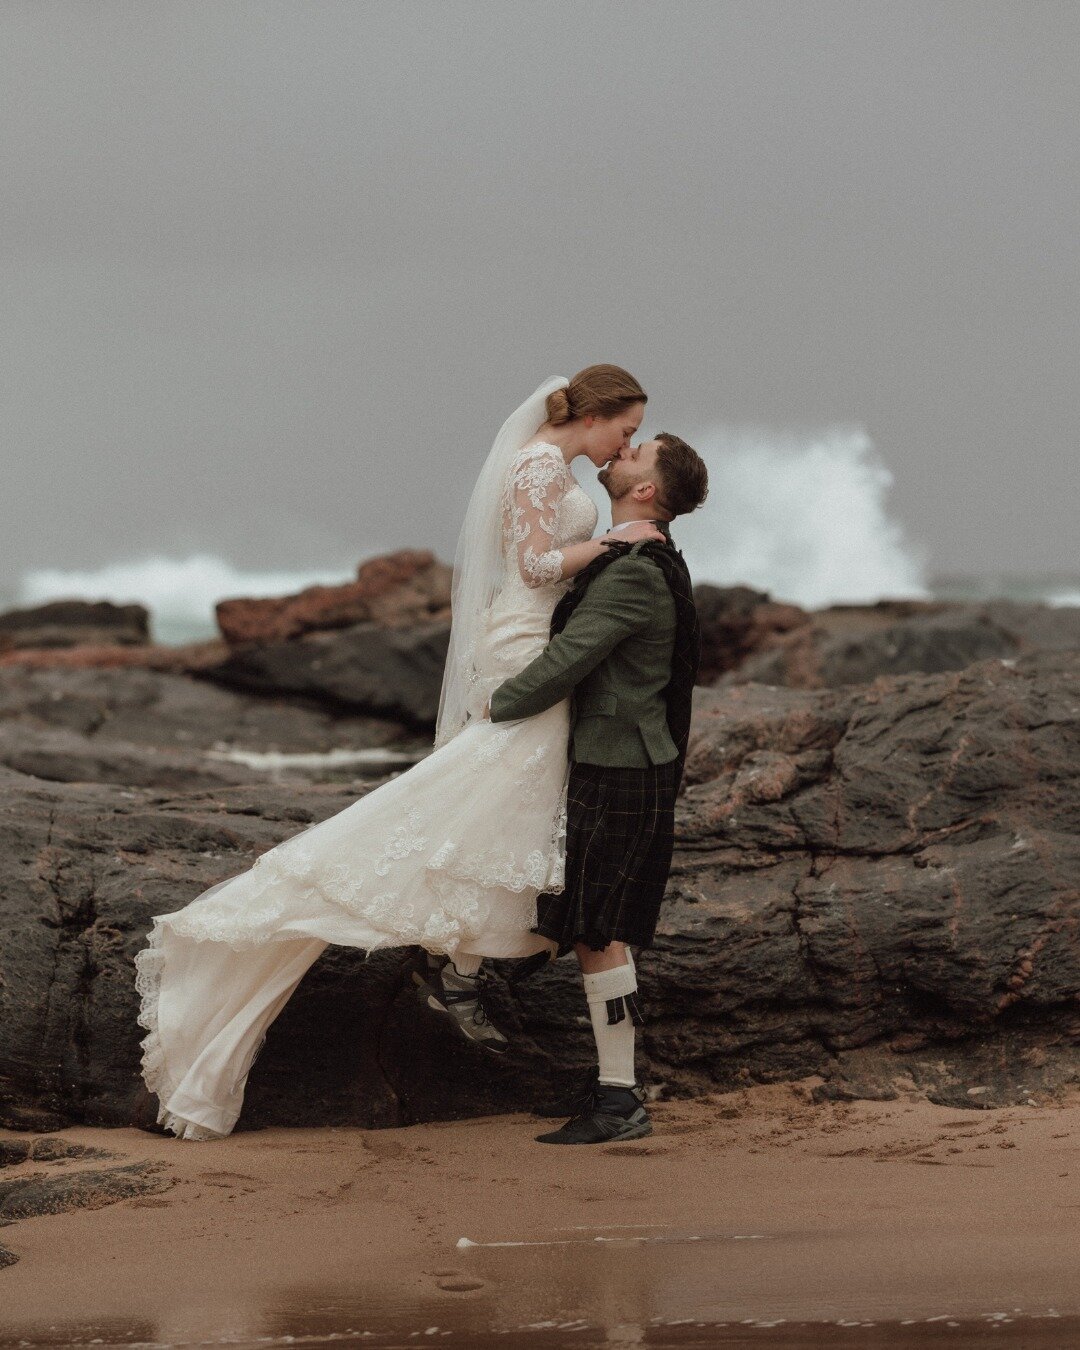 A few sneak peeks from one of our wildest elopements yet - ⁠
⁠
We are so lucky that a friend put us in touch with C &amp; M for their rugged and remote elopement to Sandwood Bay. A 4-mile hike to get to the perfect spot? Sounds like an amazing advent